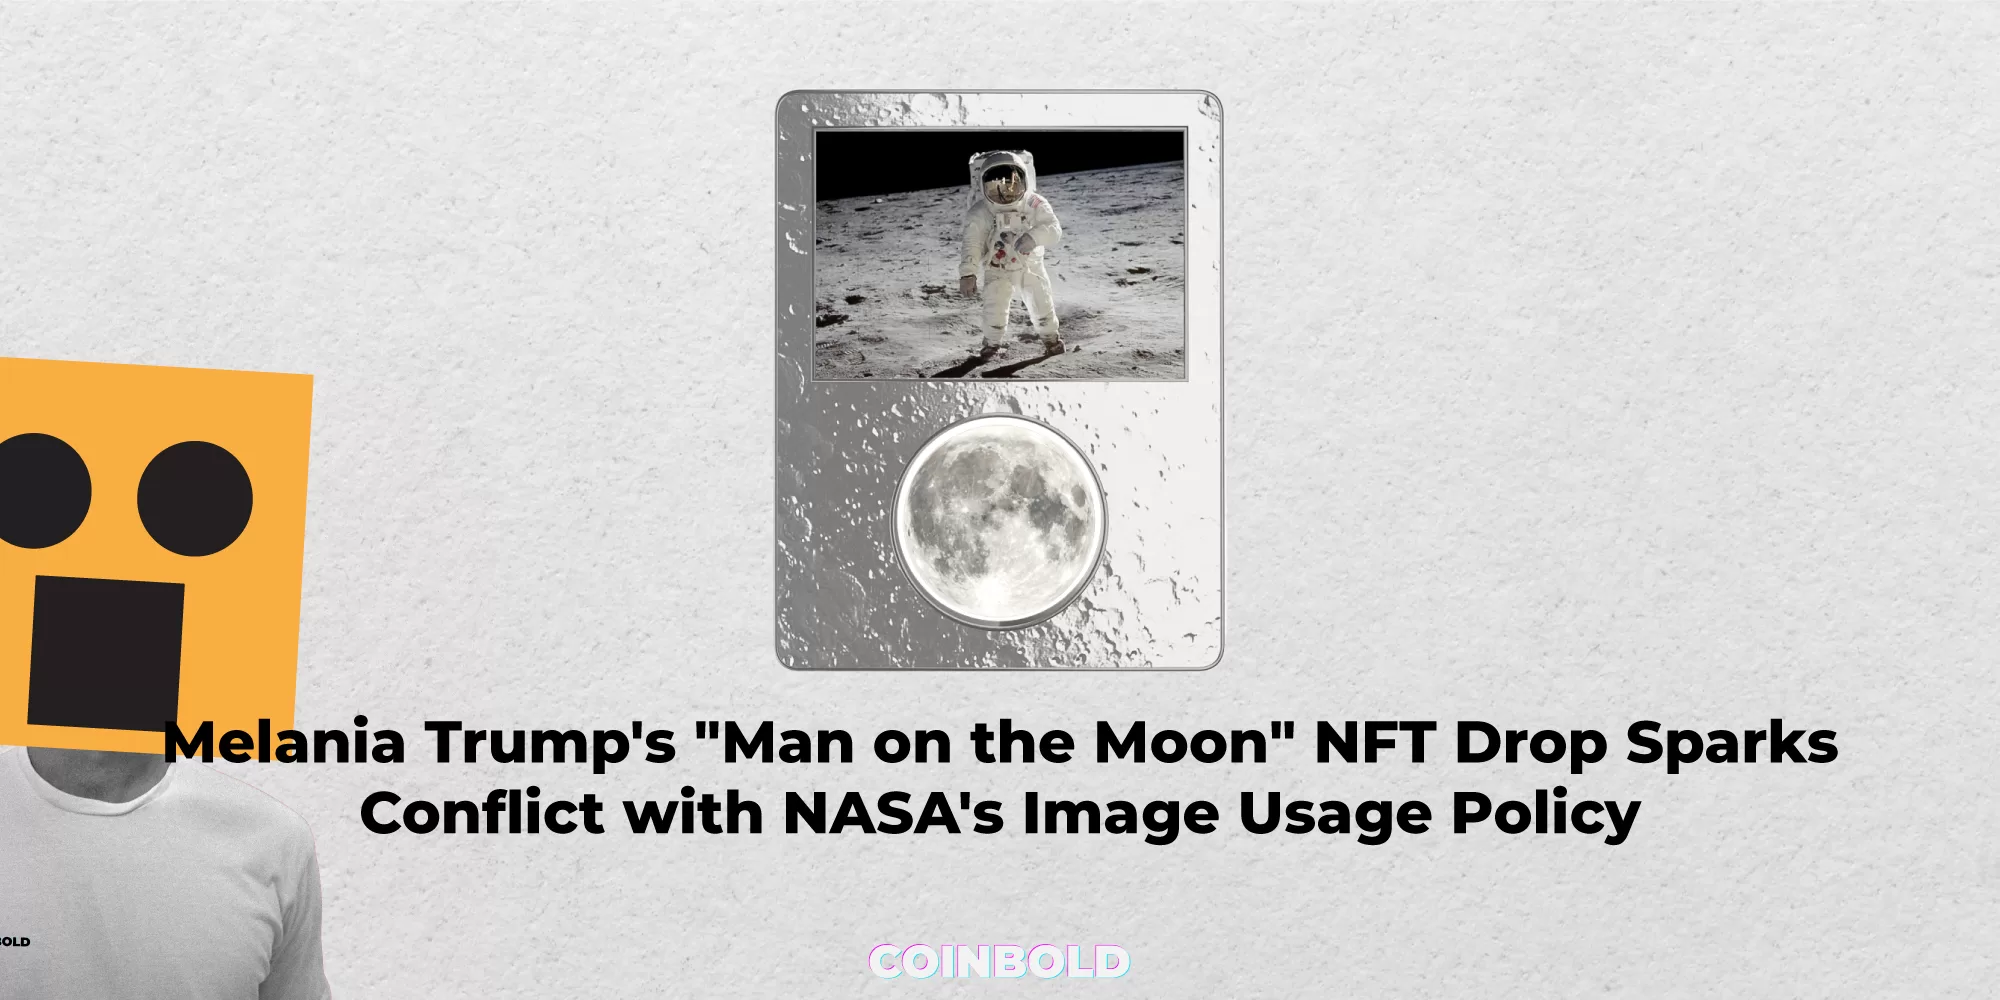 Melania Trump's "Man on the Moon" NFT Drop Sparks Conflict with NASA's Image Usage Policy